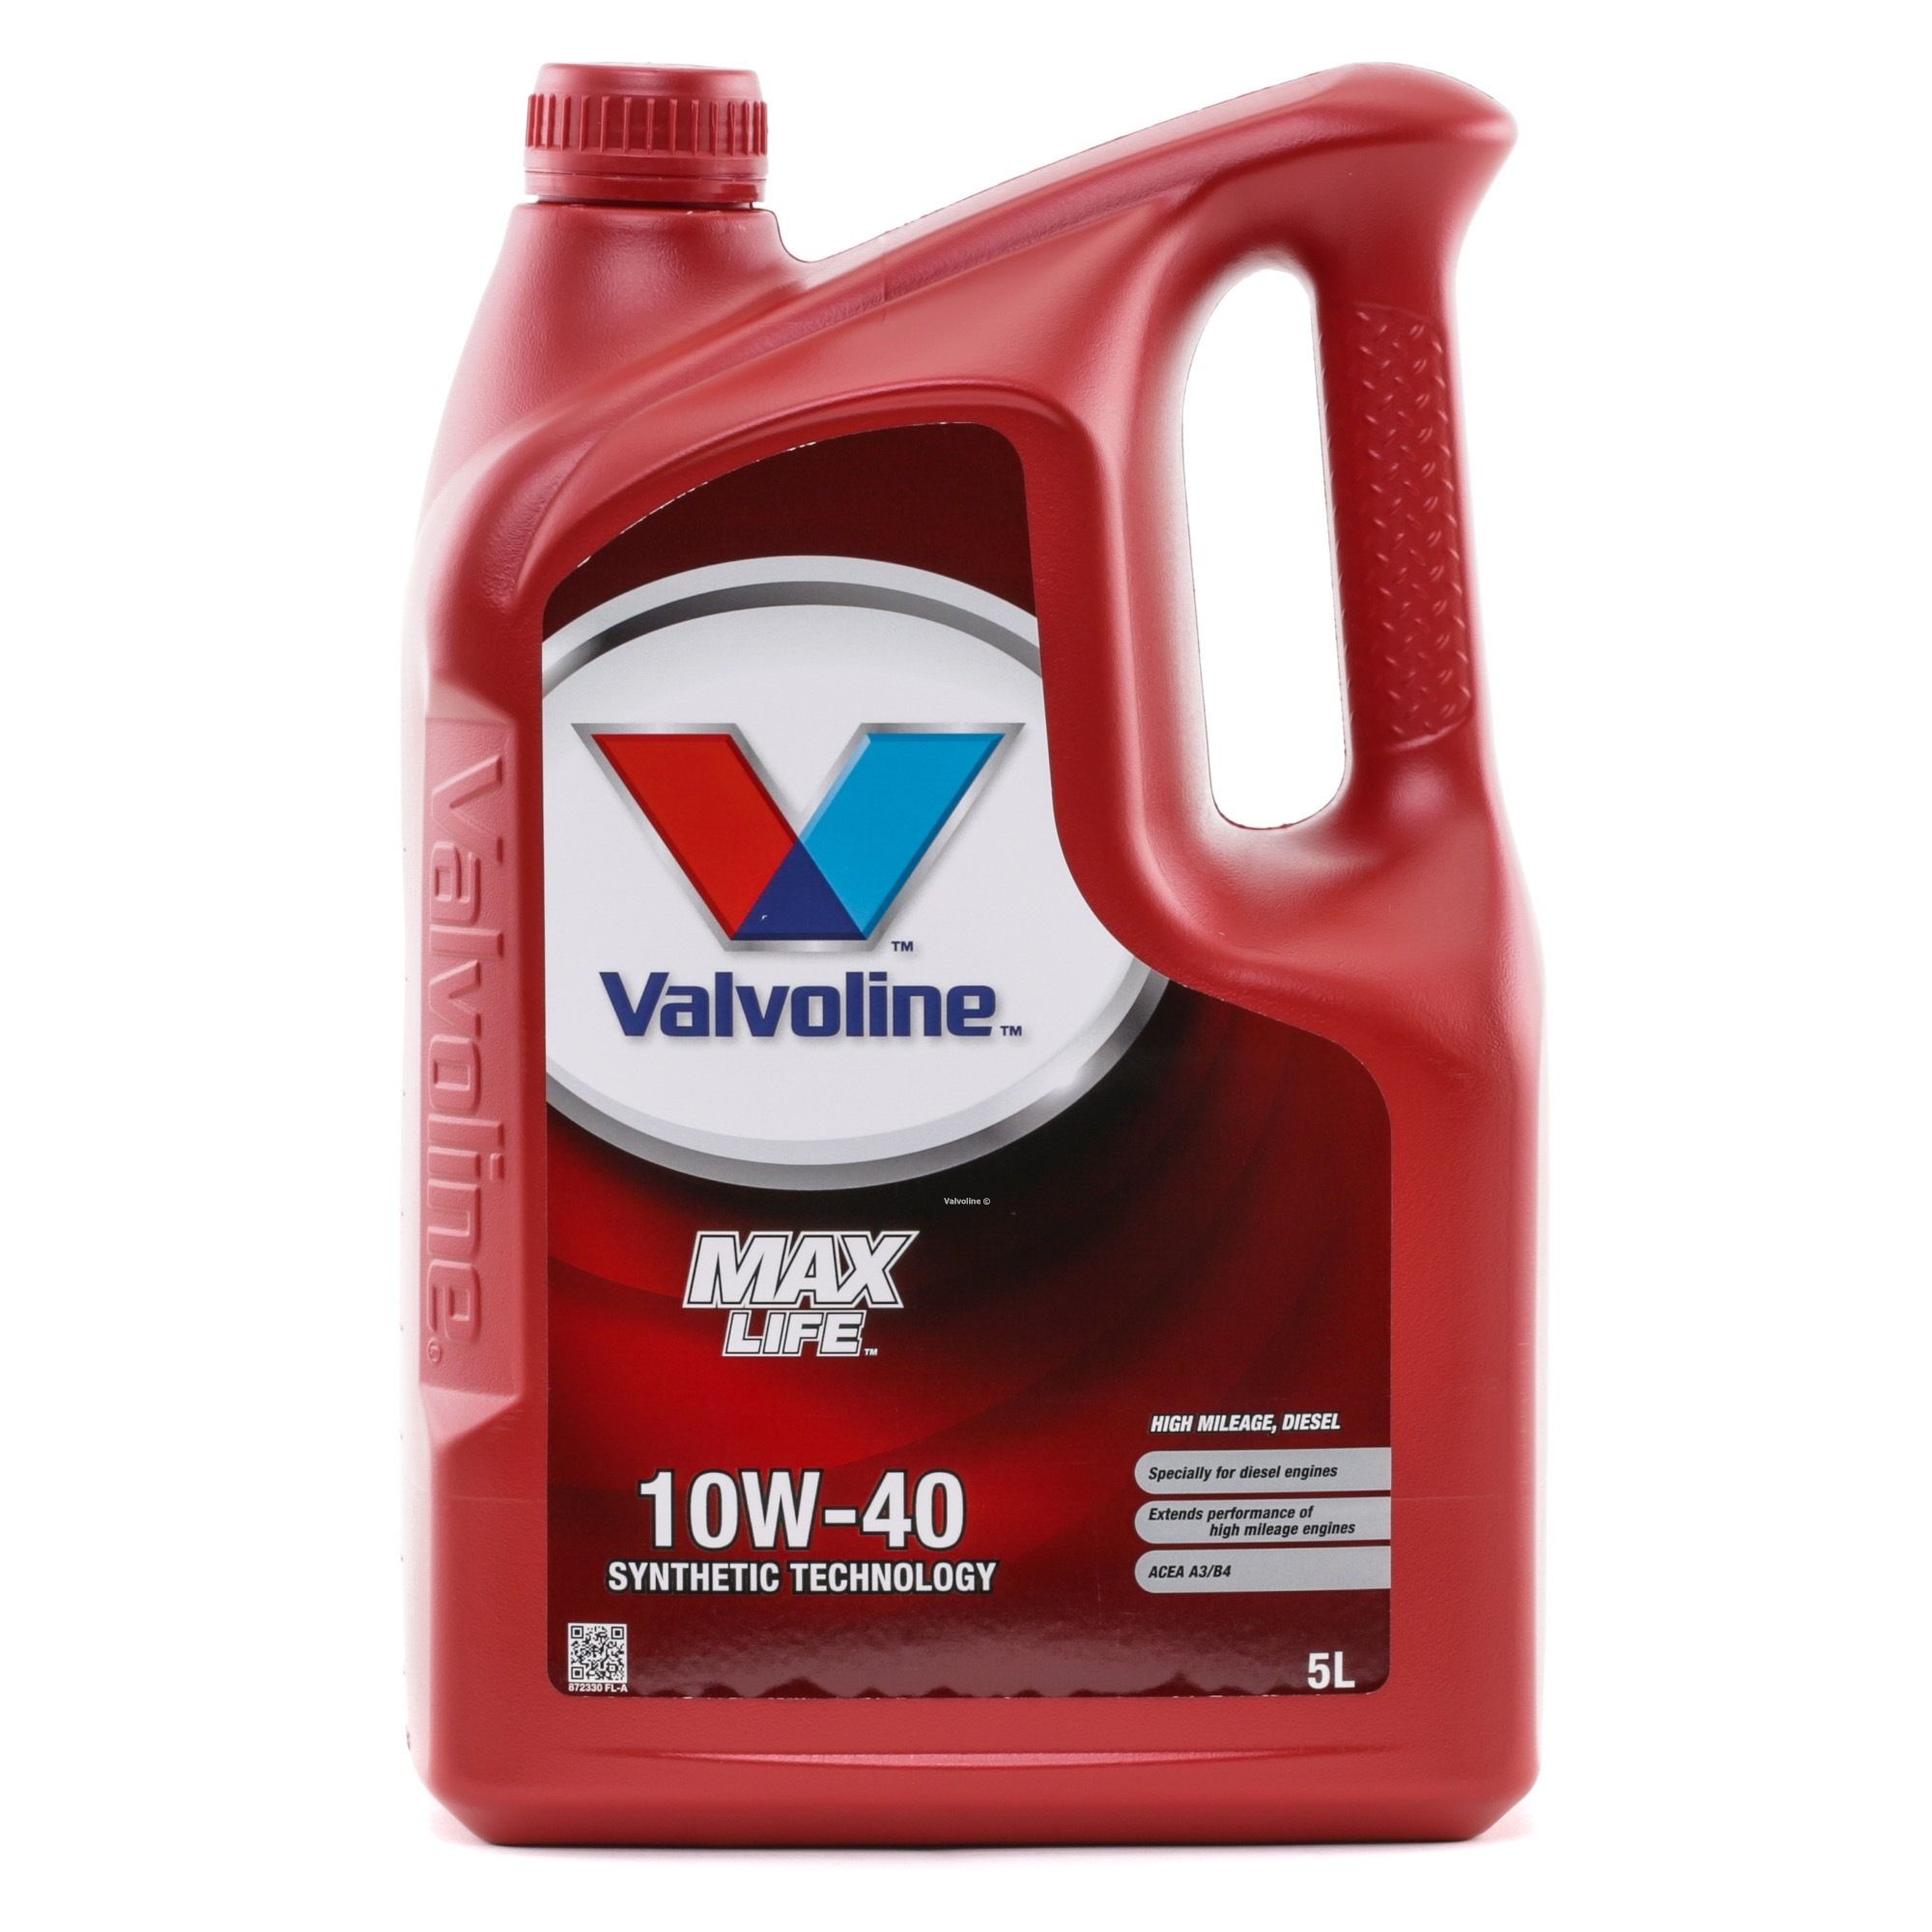 Engine oil Valvoline 10W-40, 5l, Part Synthetic Oil longlife 872330